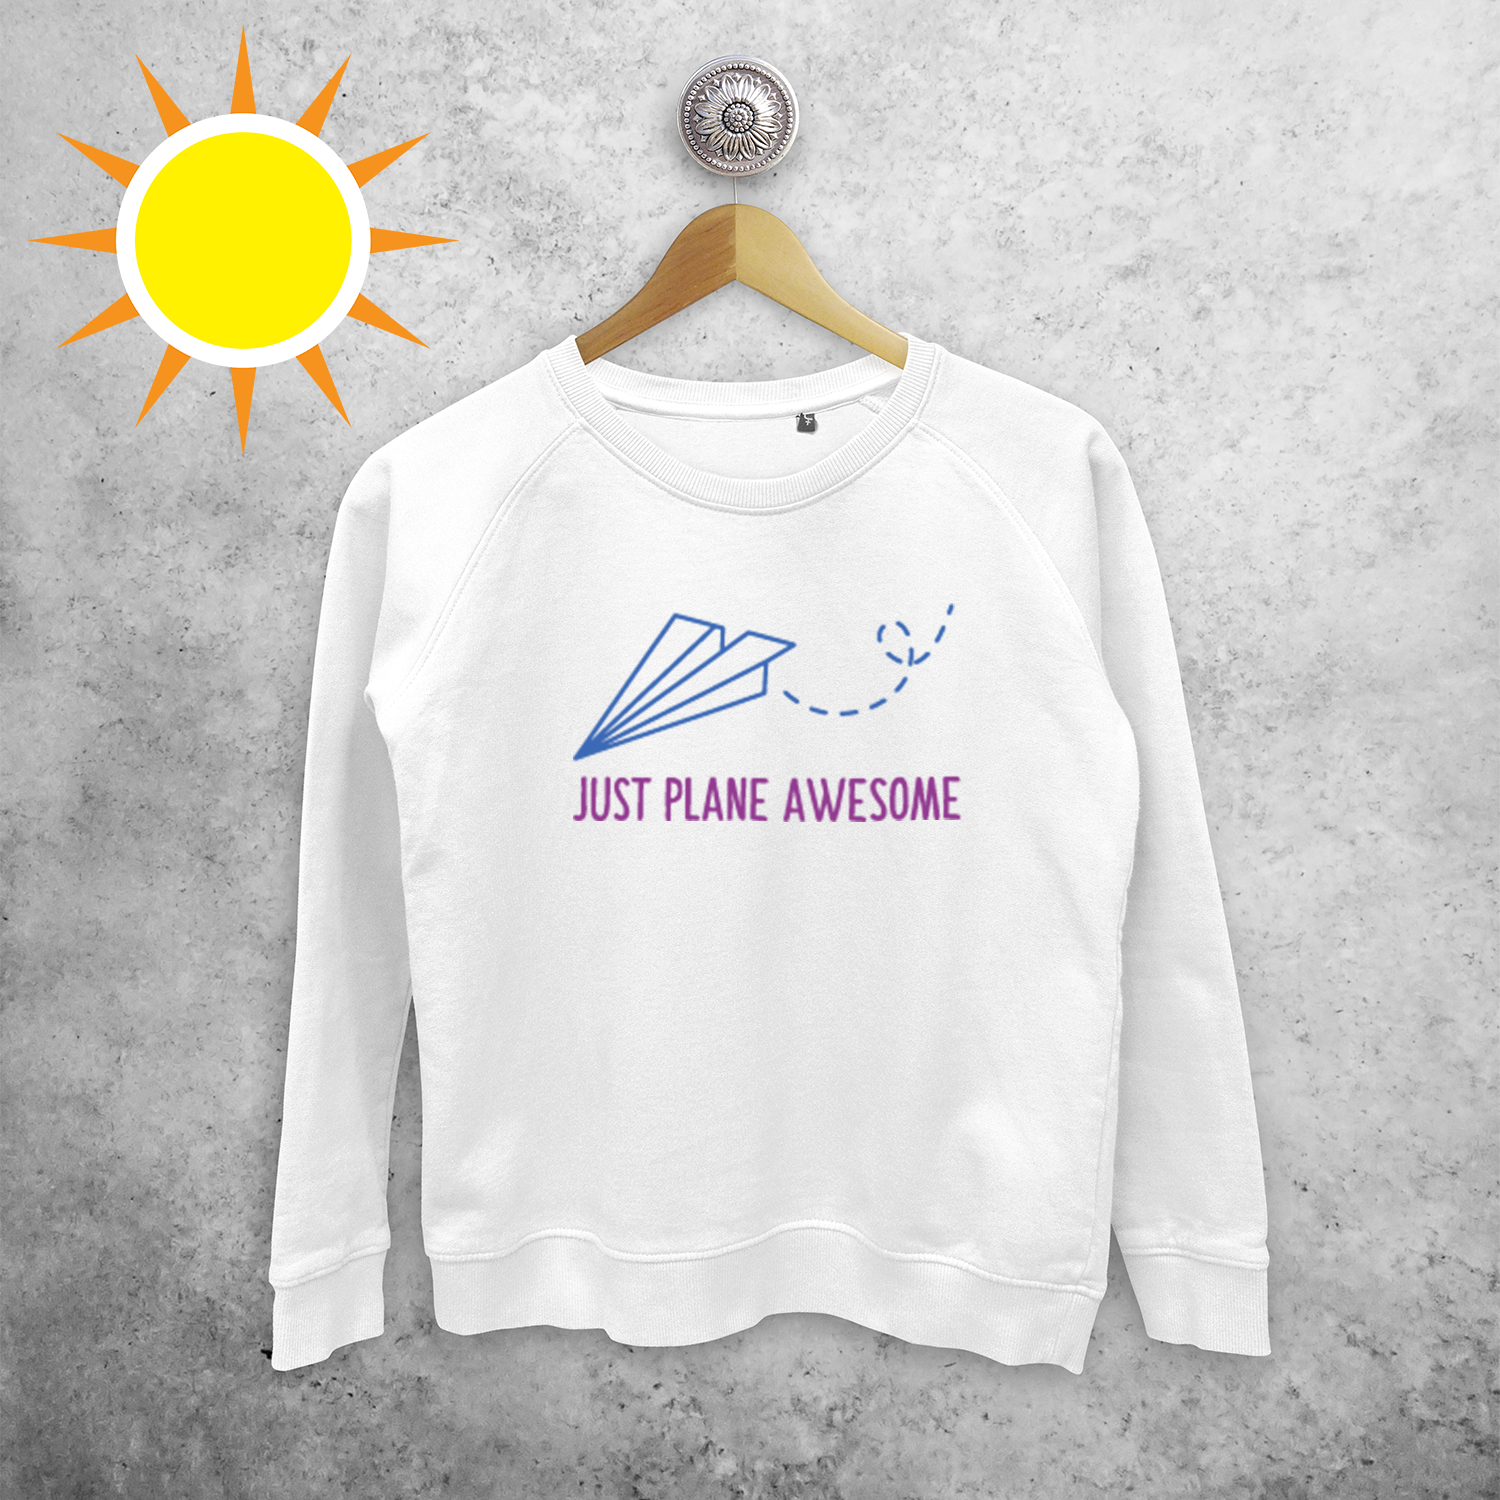 'Just plane awesome' magic sweater